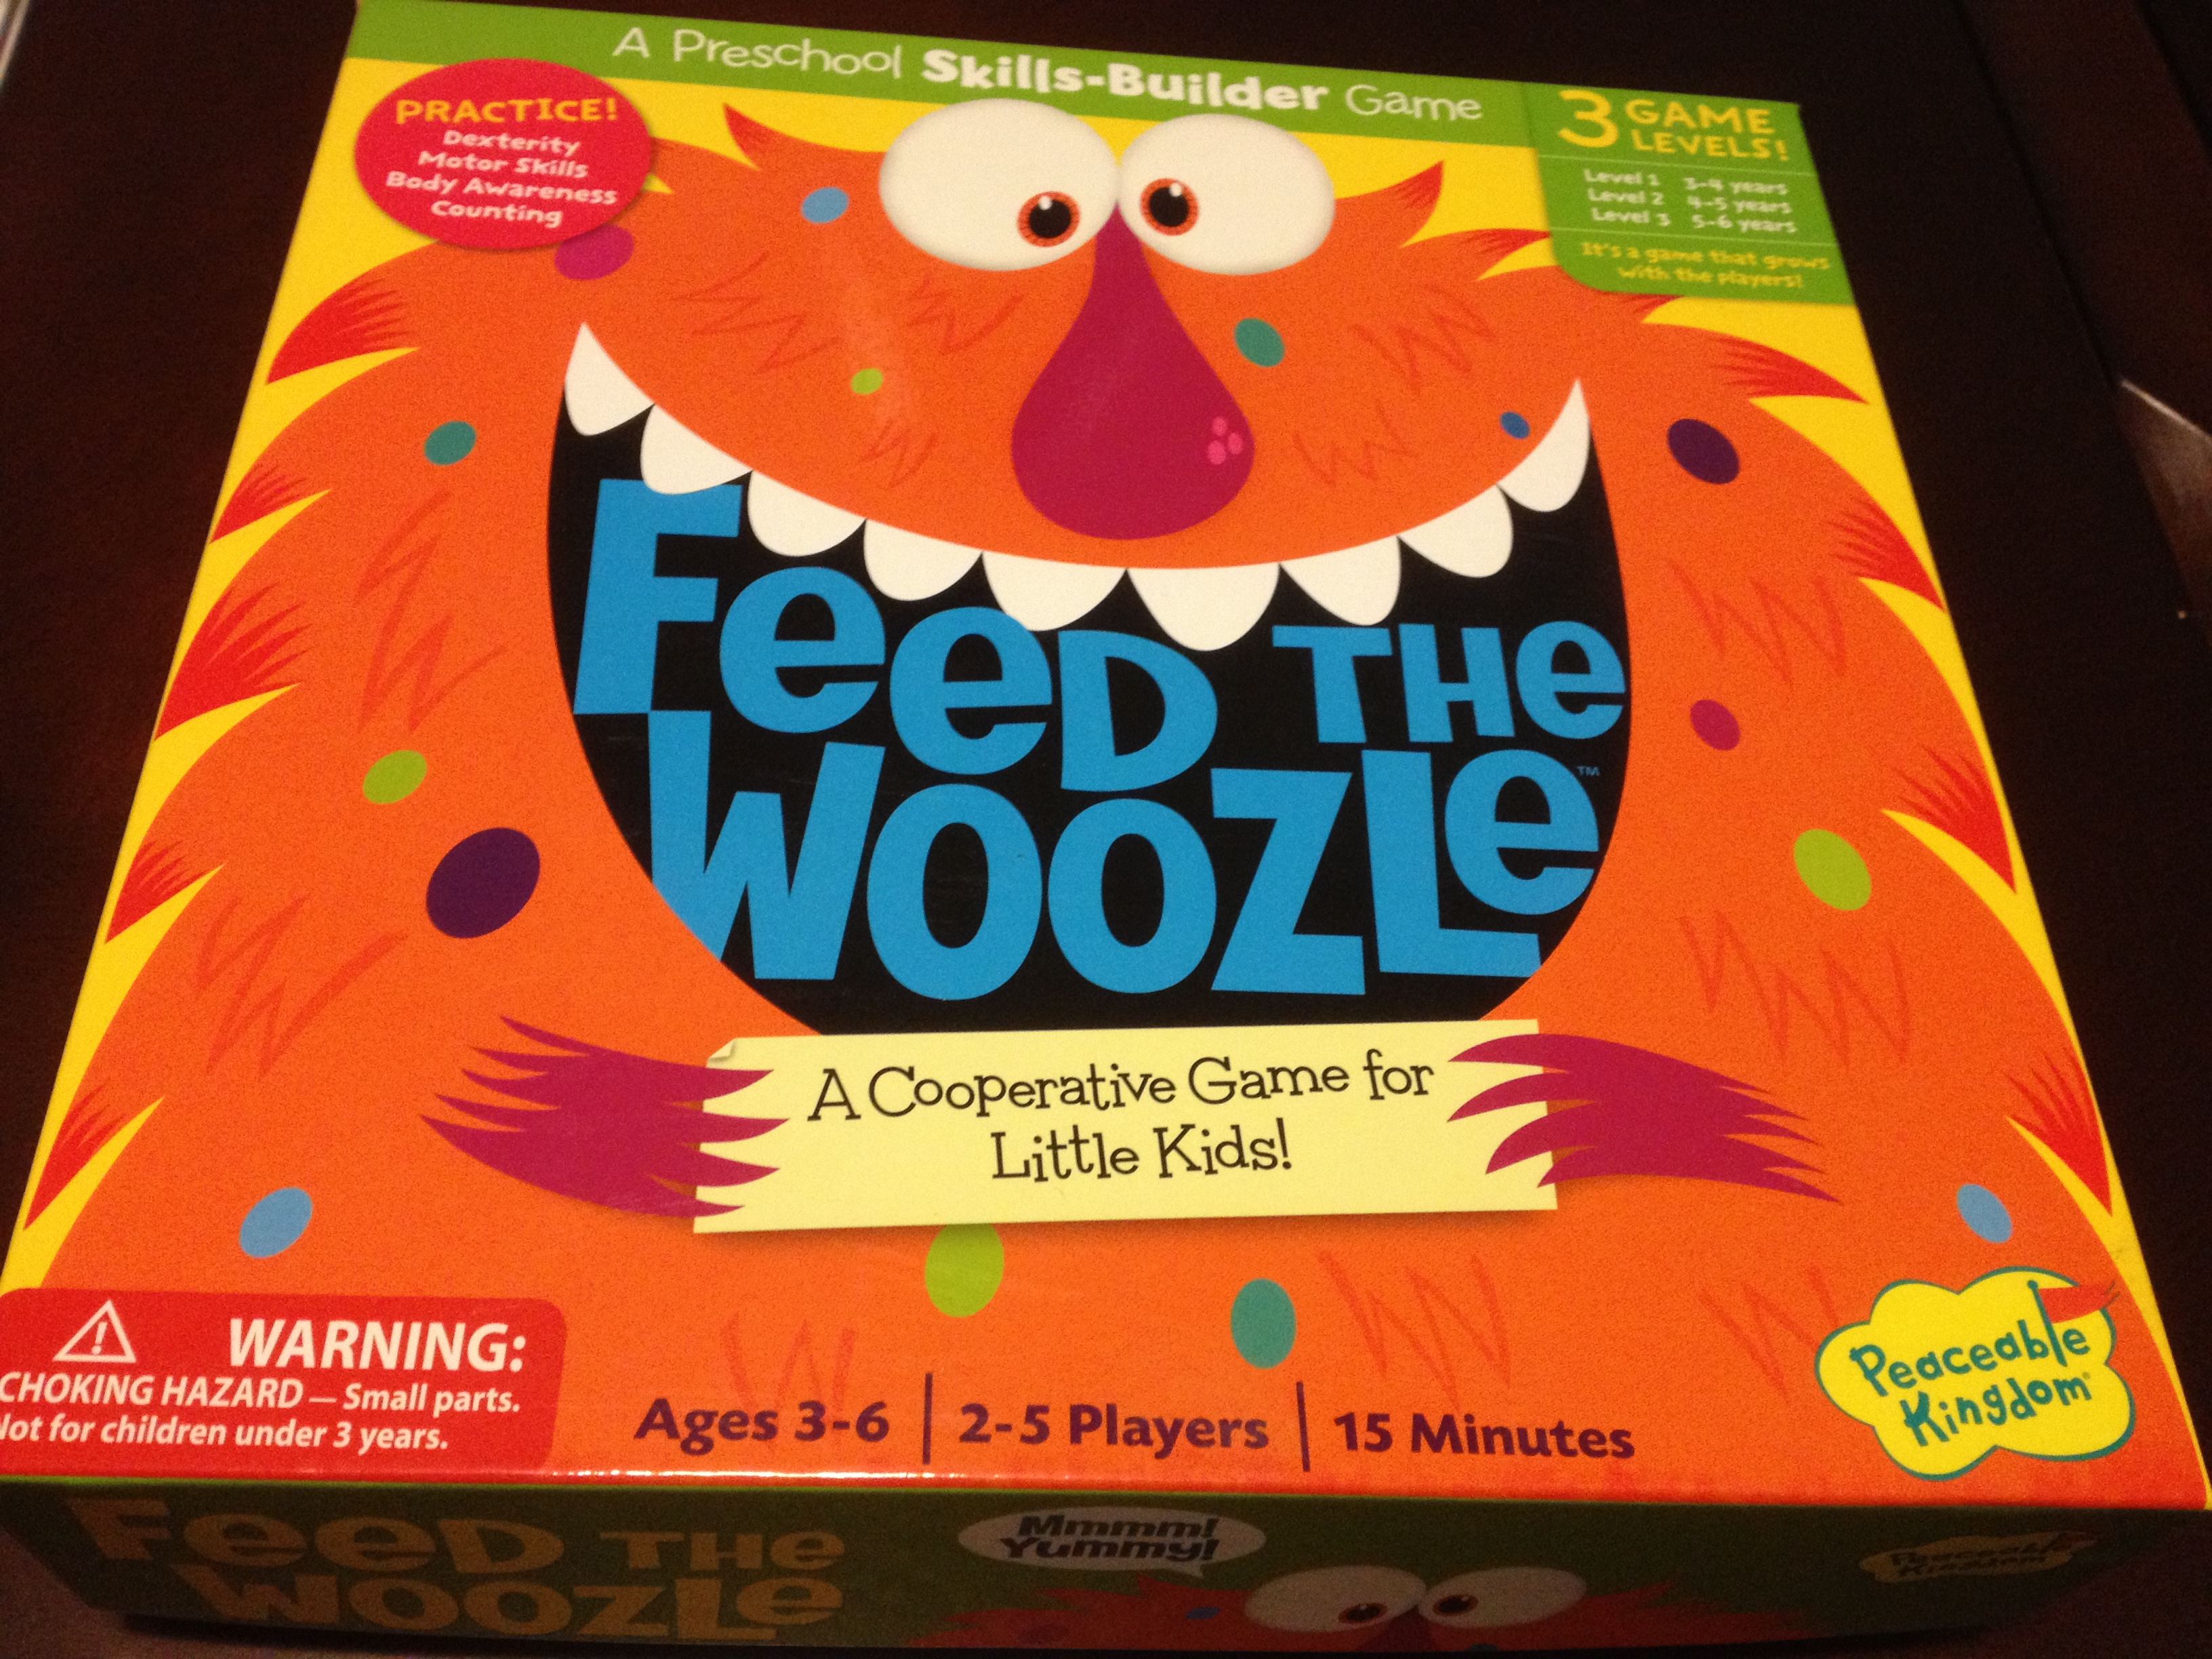 Give it Forward: Feed the Woozle